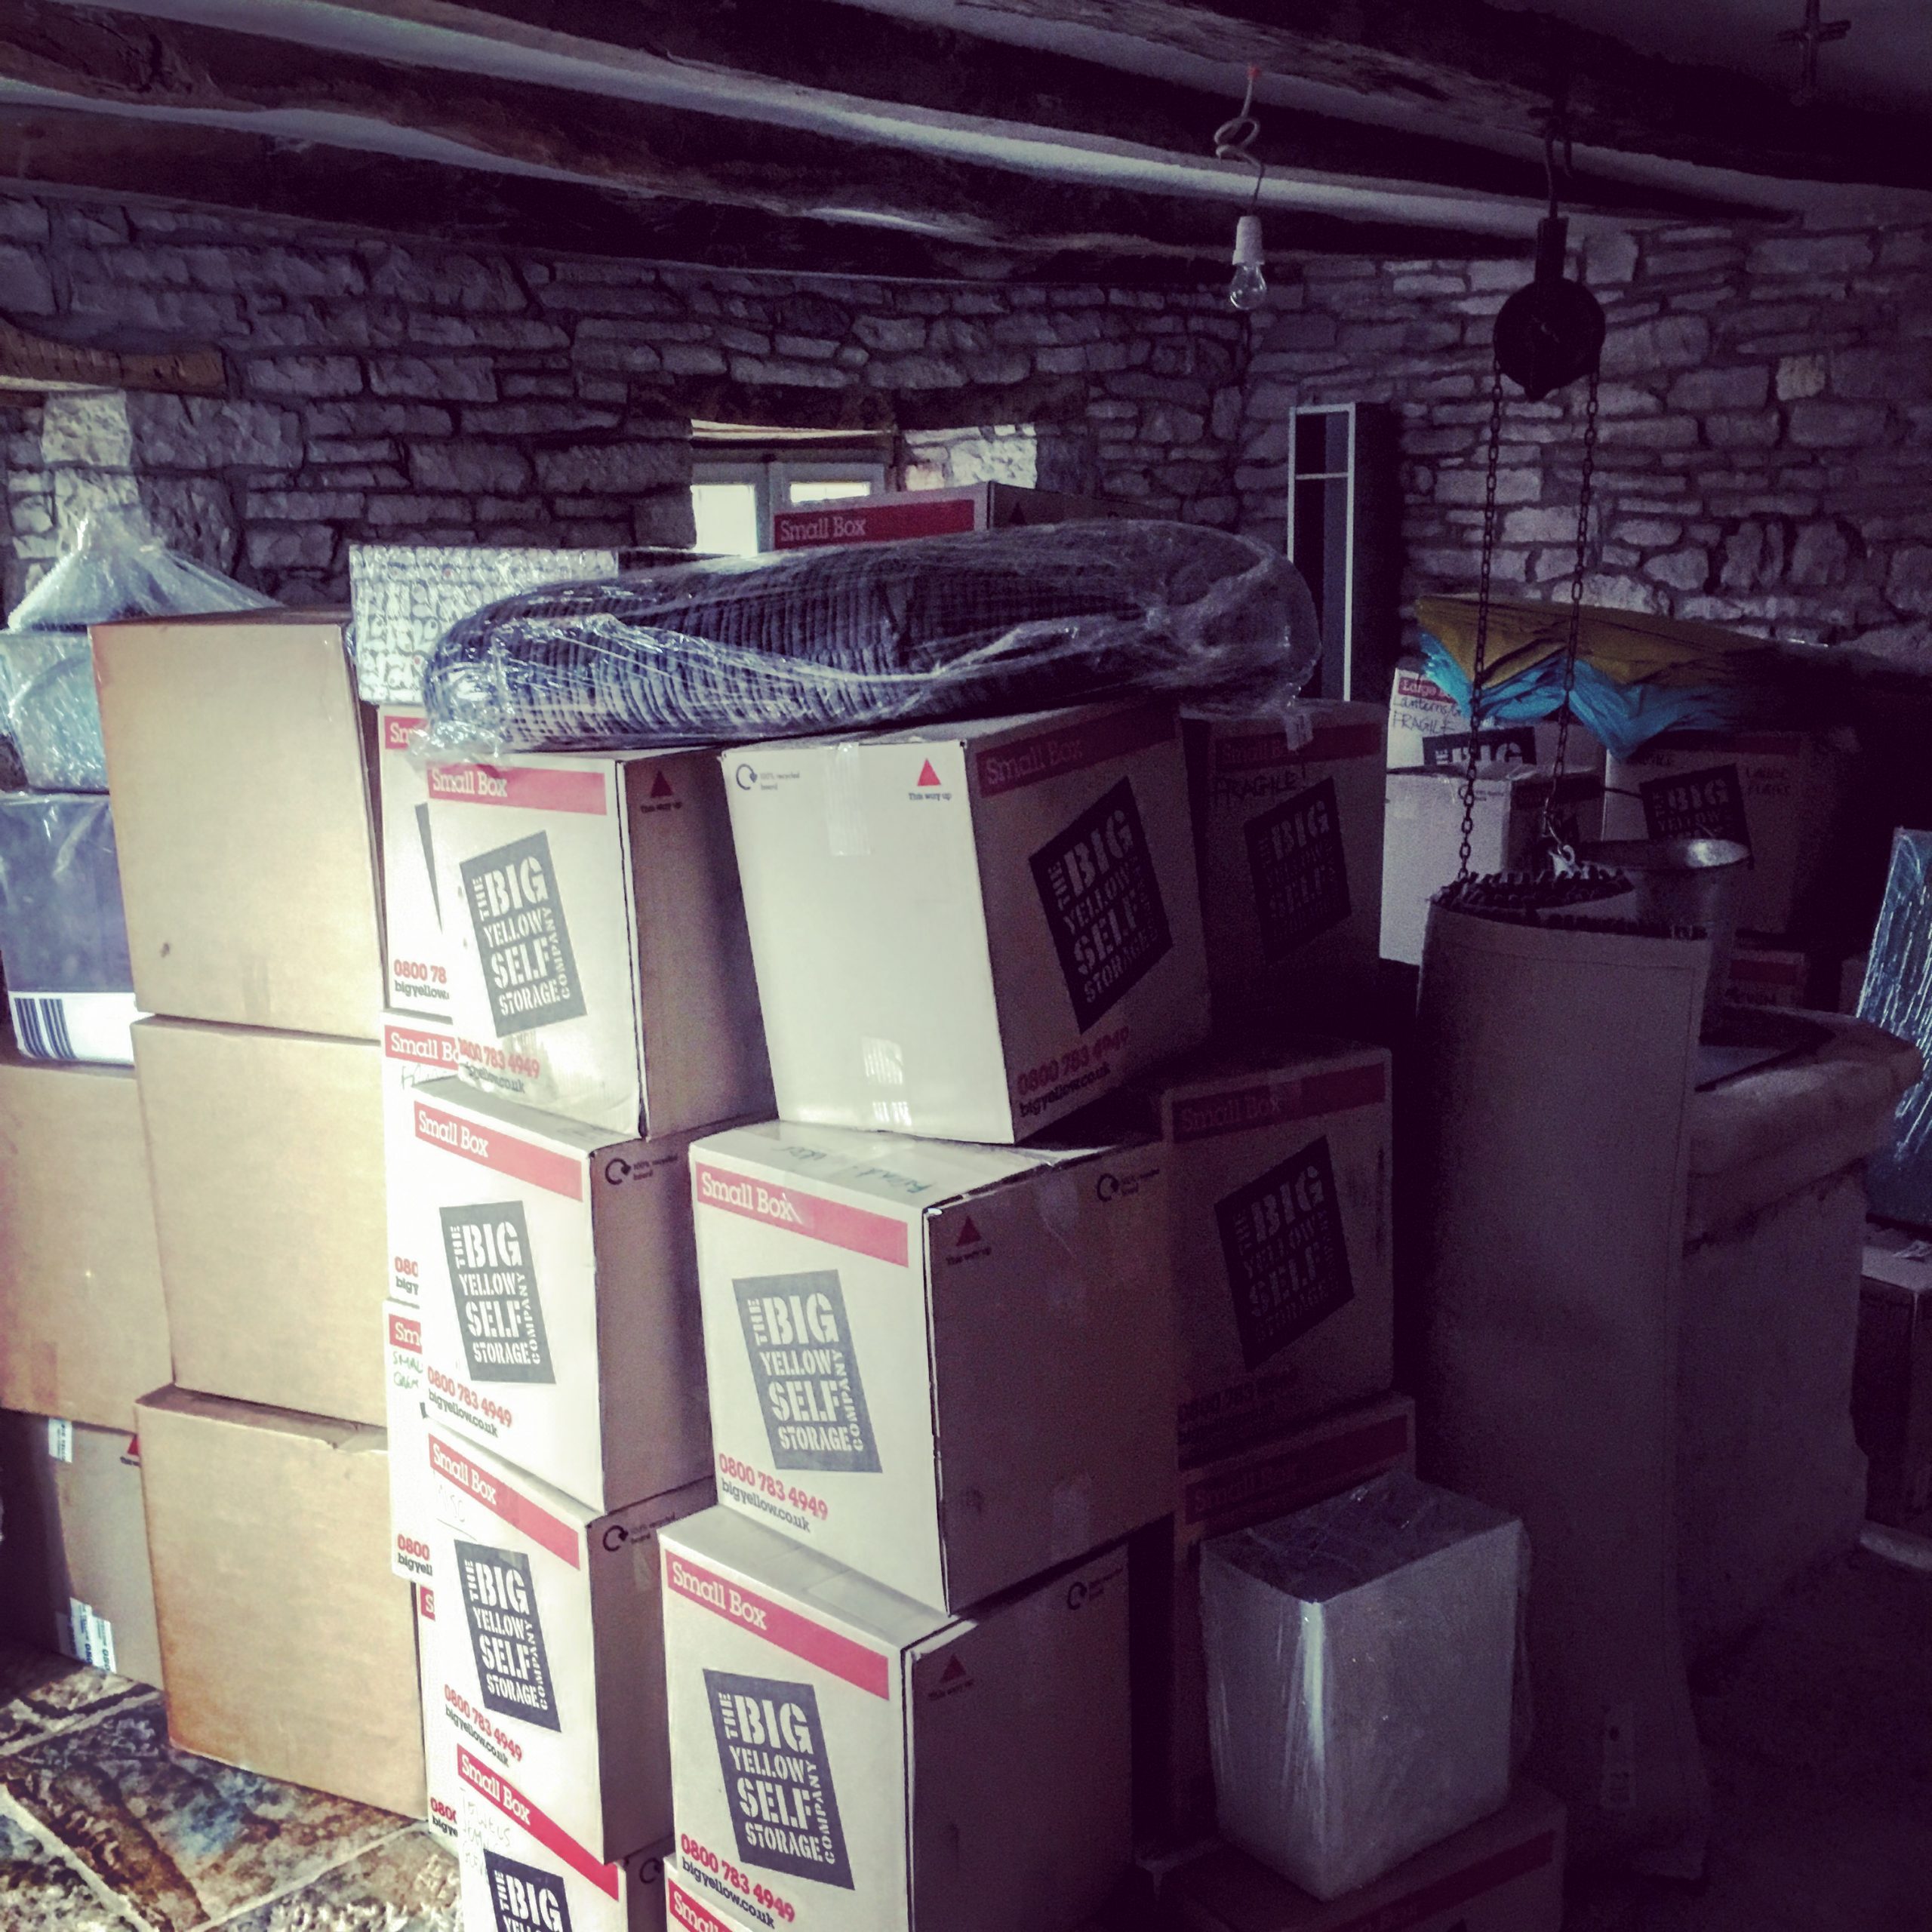 Piling the boxes high...